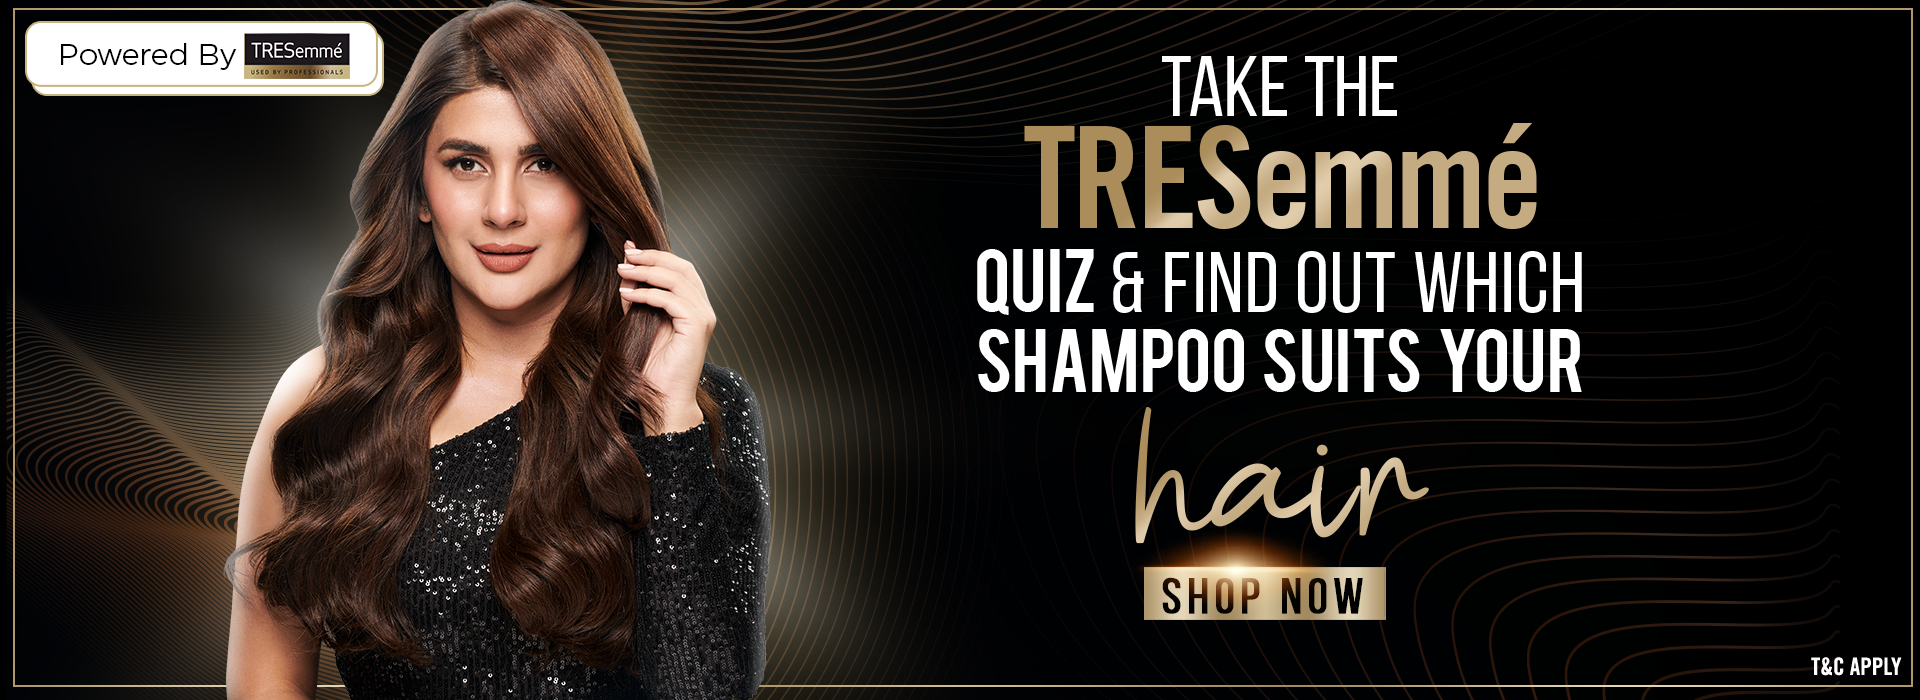 Tresemme quiz.png__PID:b1017fdd-1be5-4adc-8581-4e9c76356992